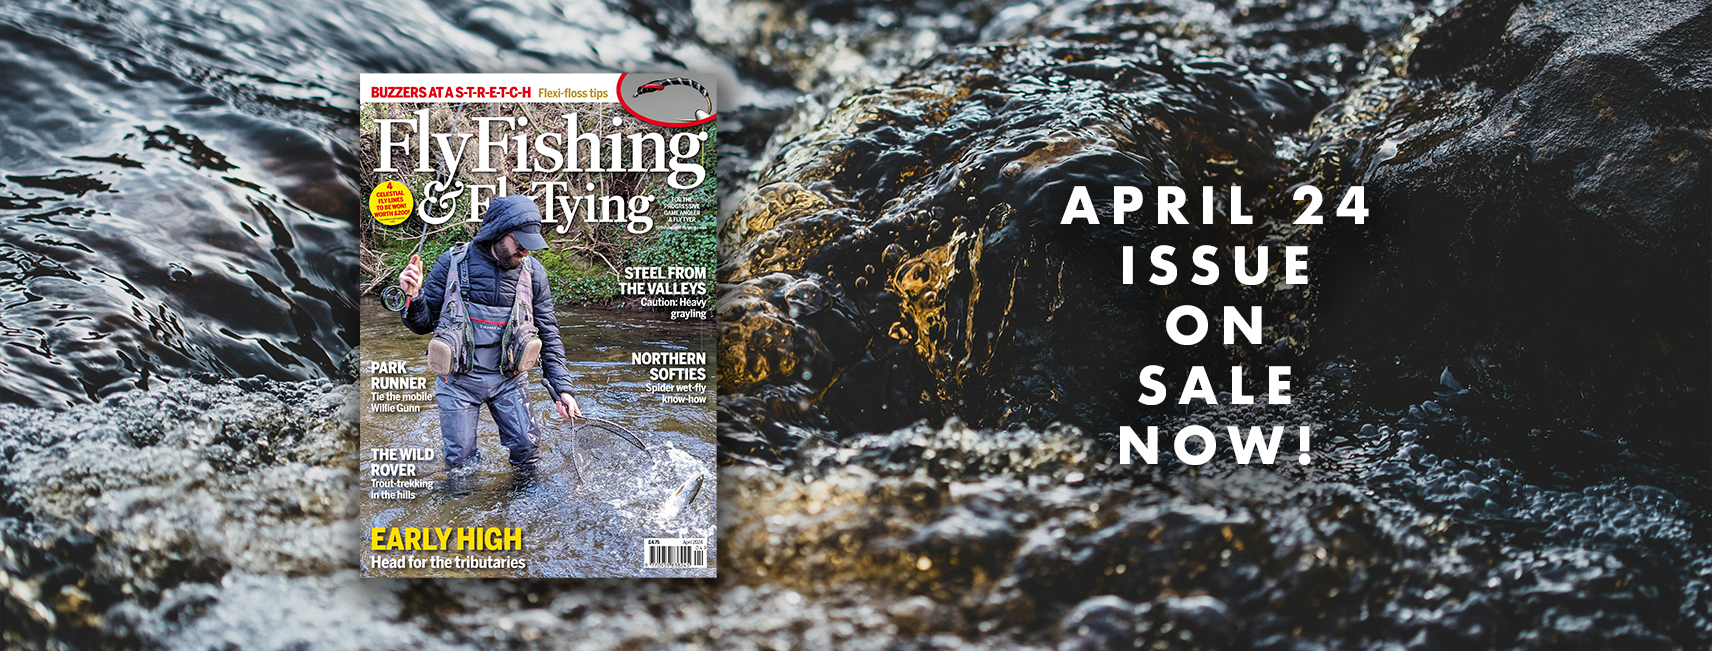 The April issue of fly fishing and fly tying